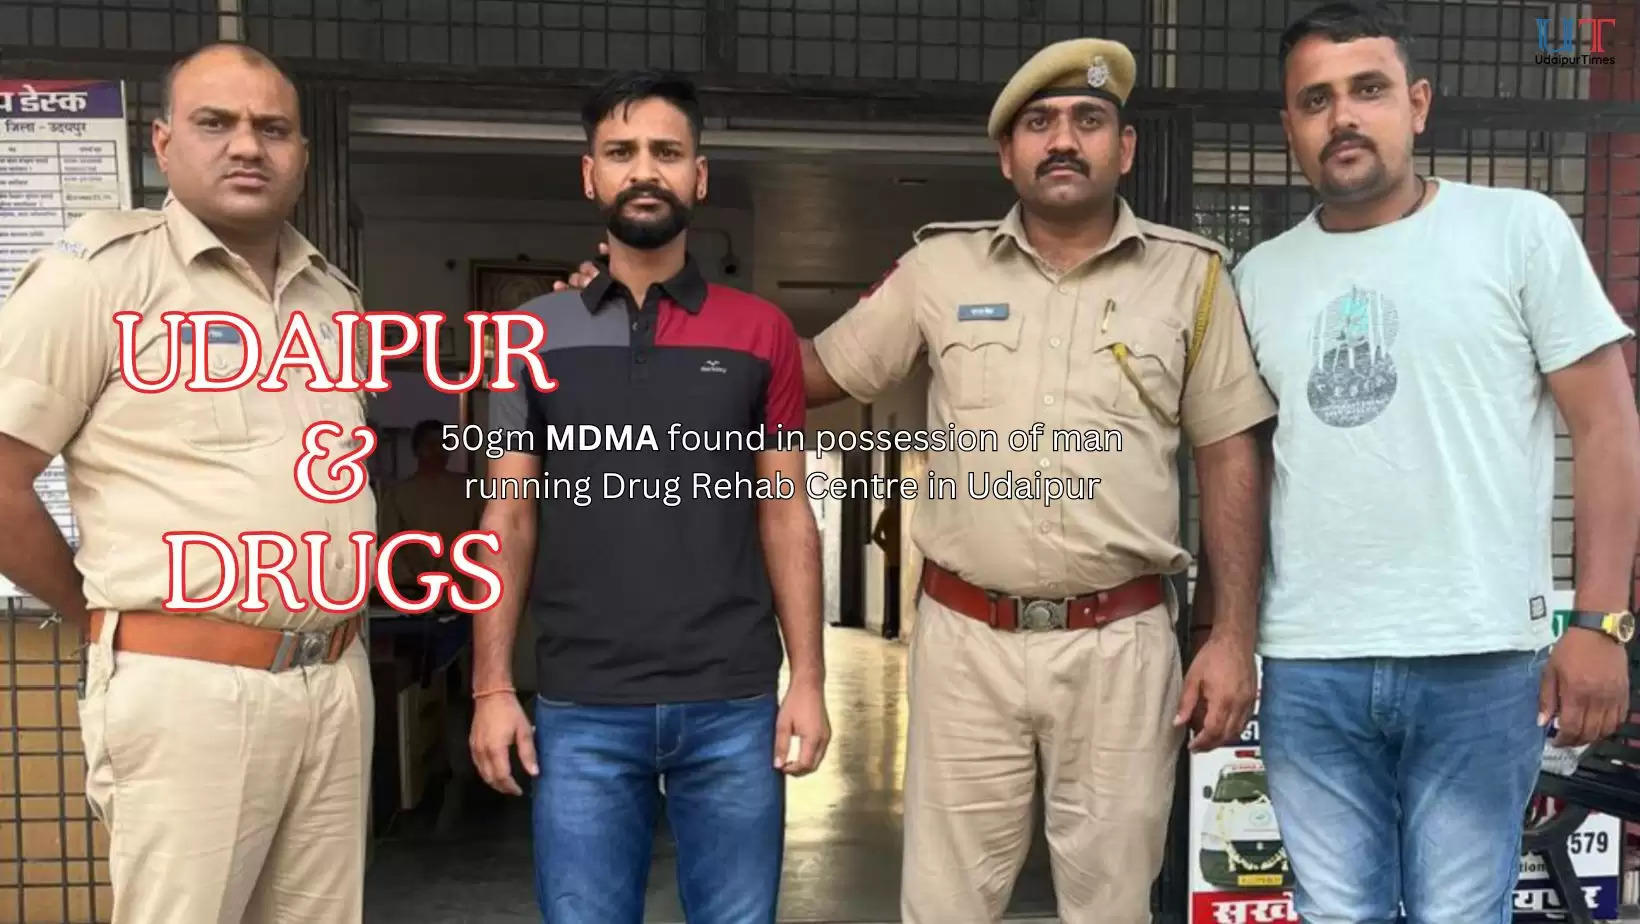 50 gram illegal MDMA drugs found in possession of man running a drug rehabilitation centre in Udaipur